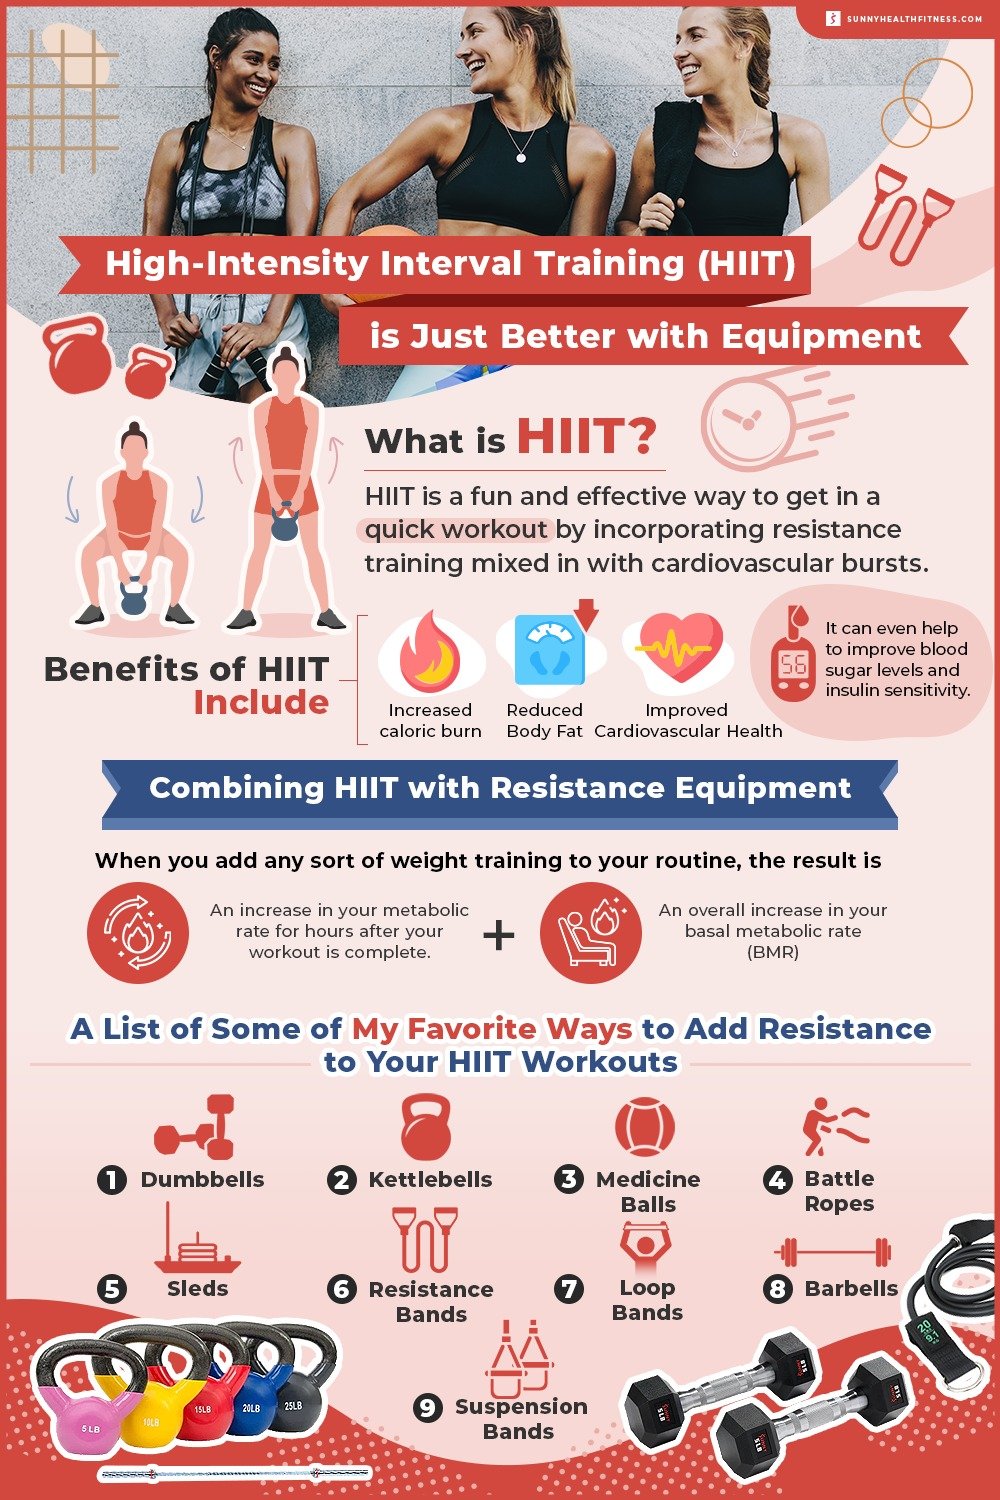 HIIT is just better with Equipment